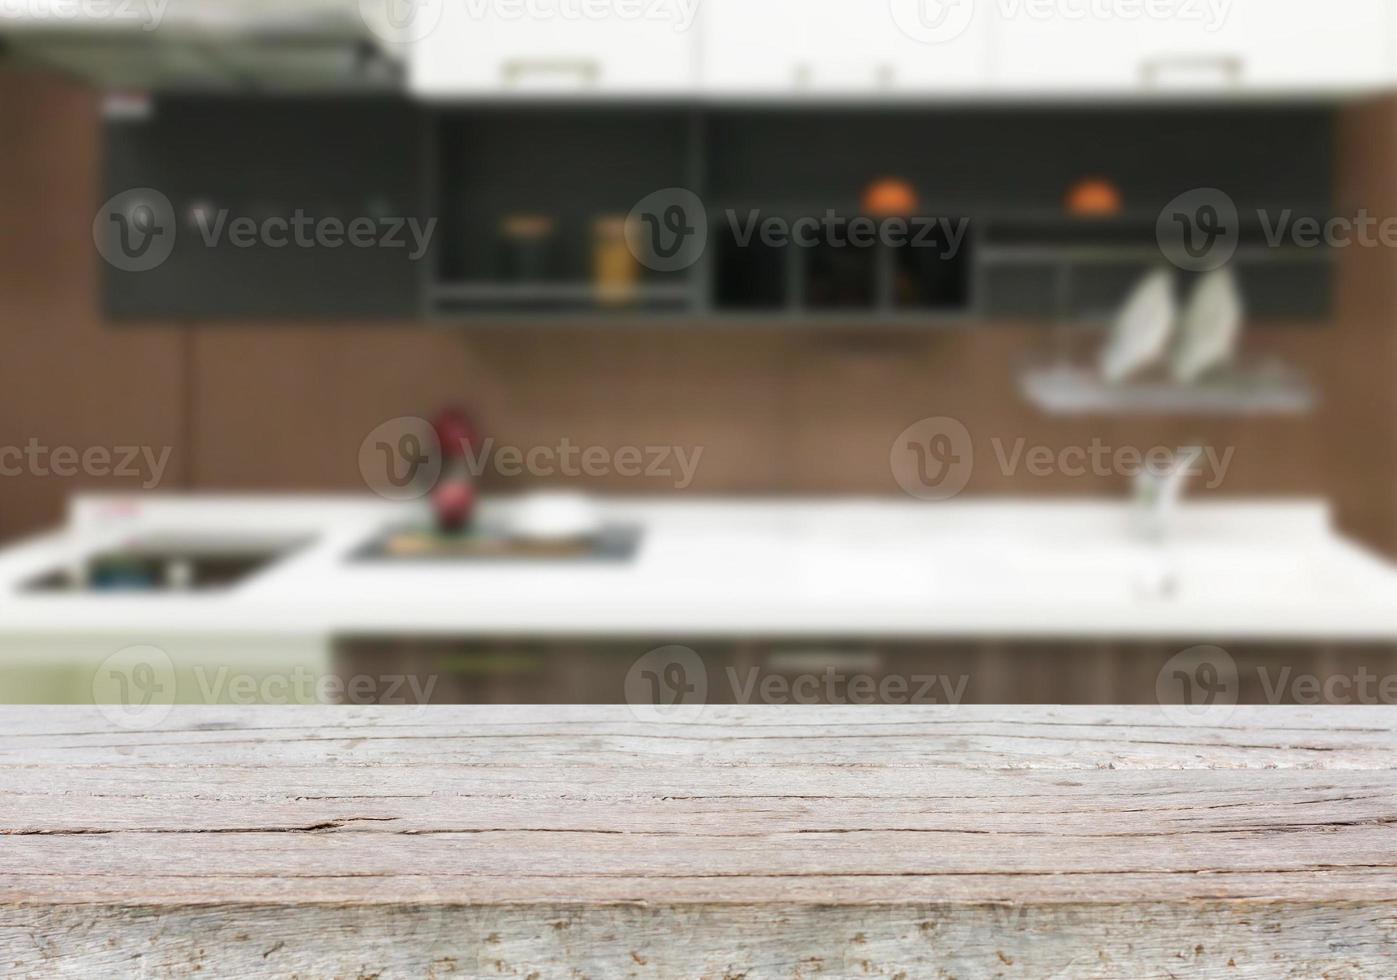 Empty wooden table and blurred kitchen background photo